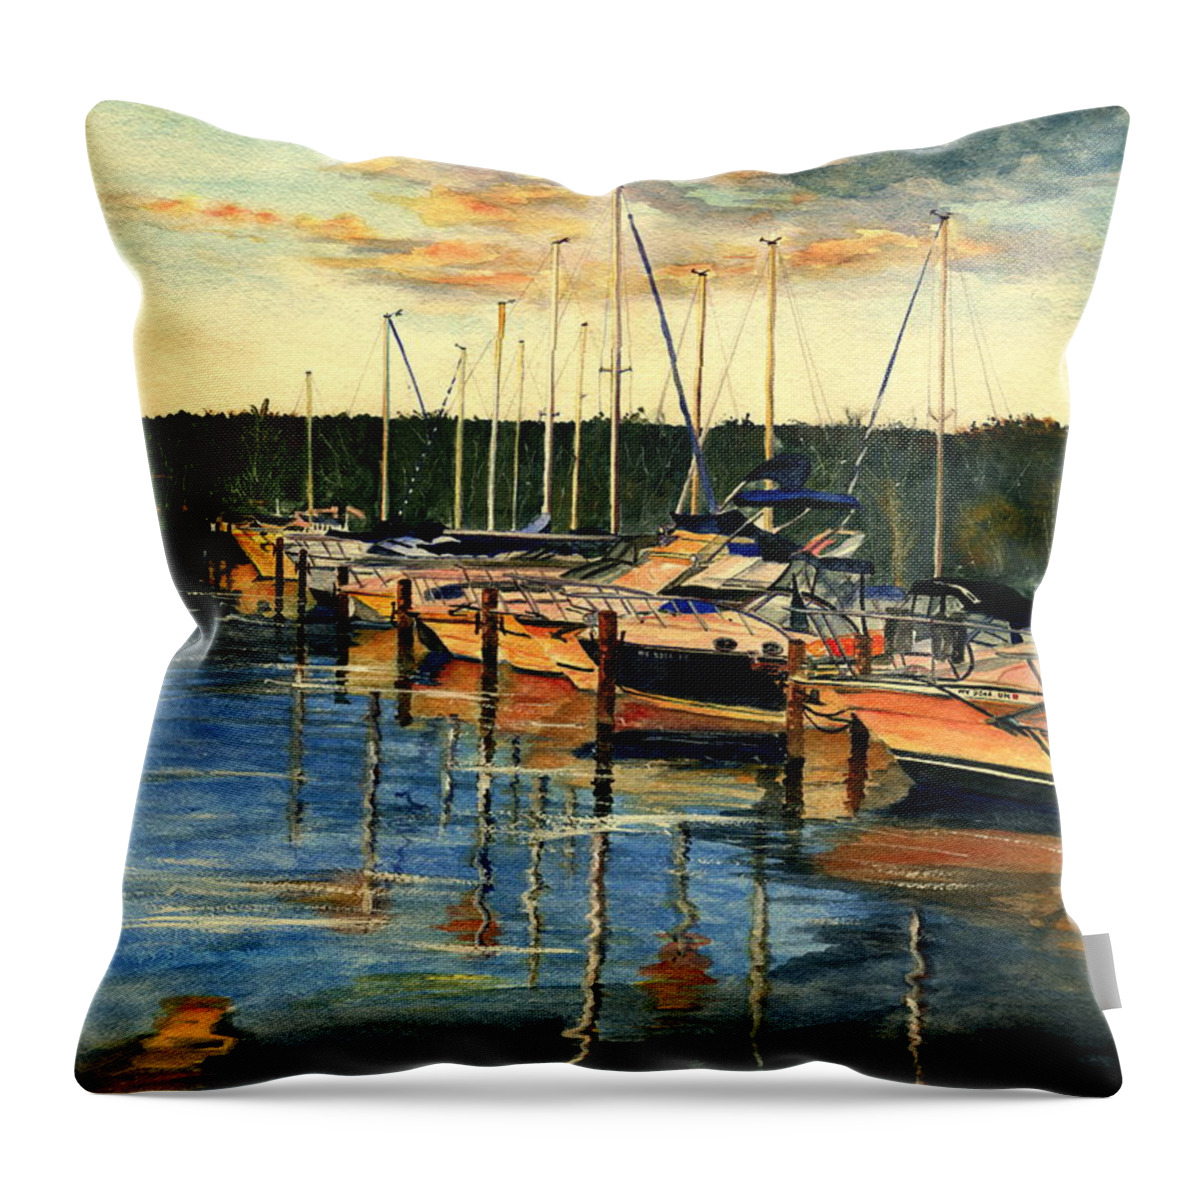 Sunset Throw Pillow featuring the painting When The Evening Come by Melly Terpening